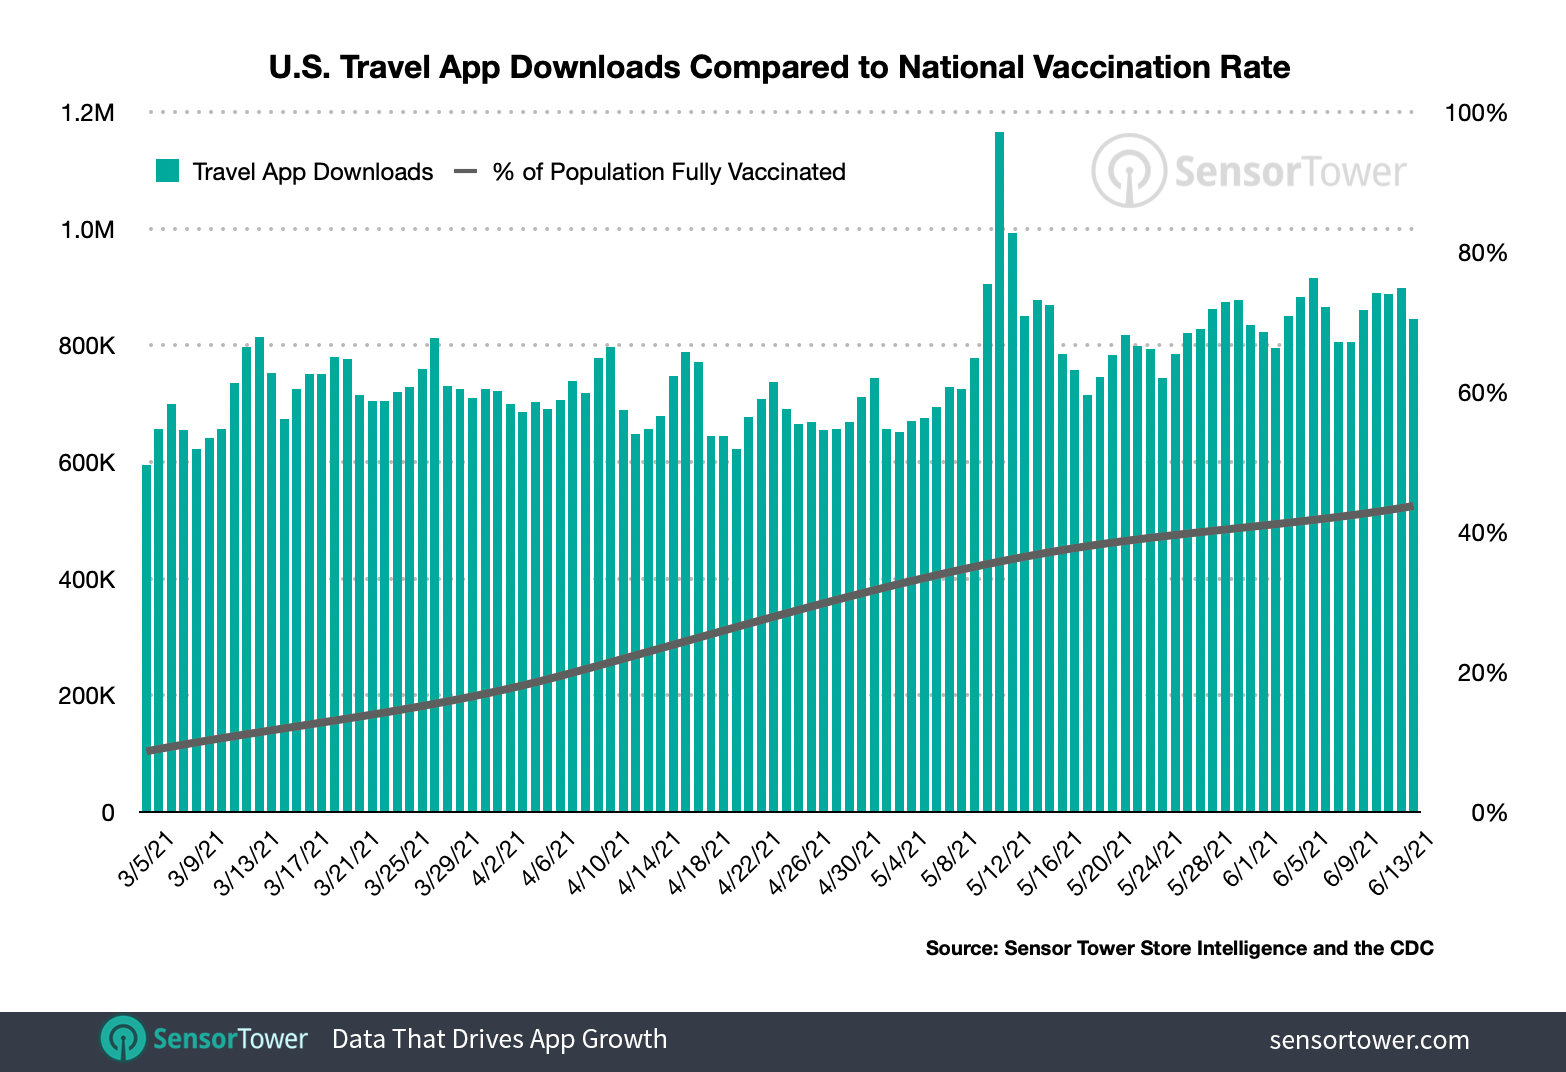 Travel app installs in the U.S. compared to vaccination rates.